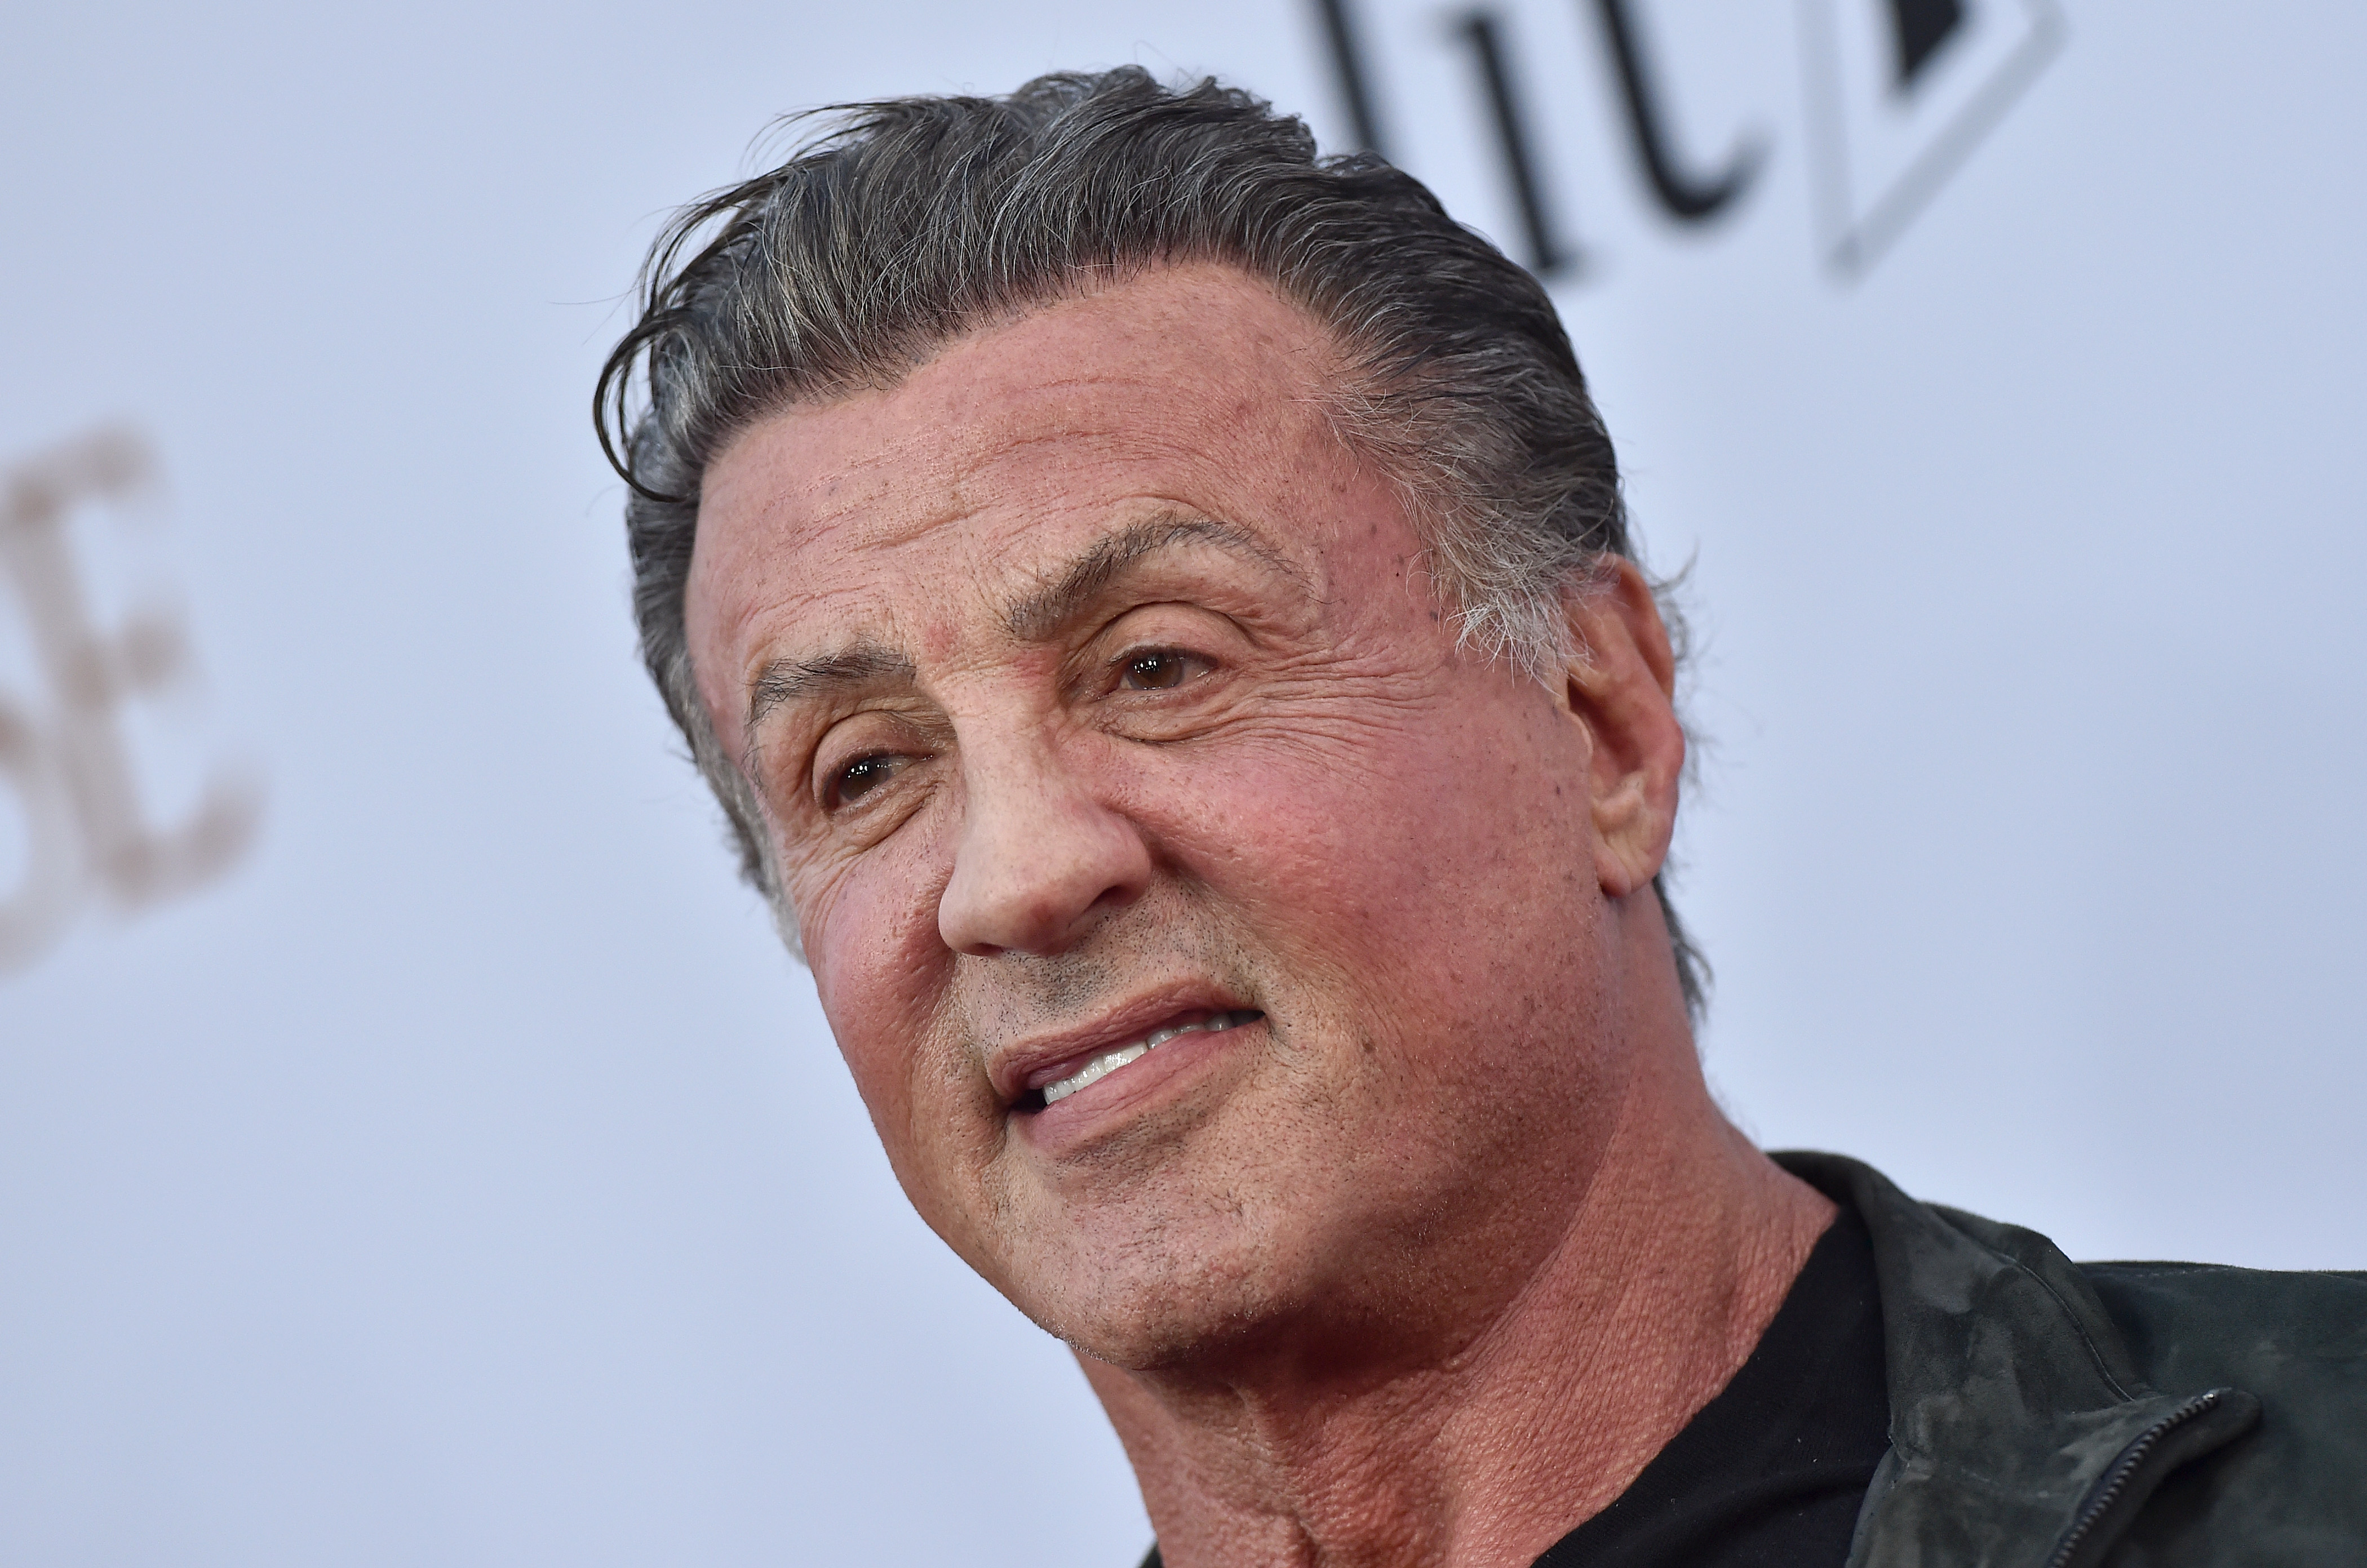 Actor Sylvester Stallone arrives at the Premiere of Open Road Films' 'The Promise' at TCL Chinese Theatre on April 12, 2017 in Hollywood, California. (Axelle/Bauer-Griffin—FilmMagic)